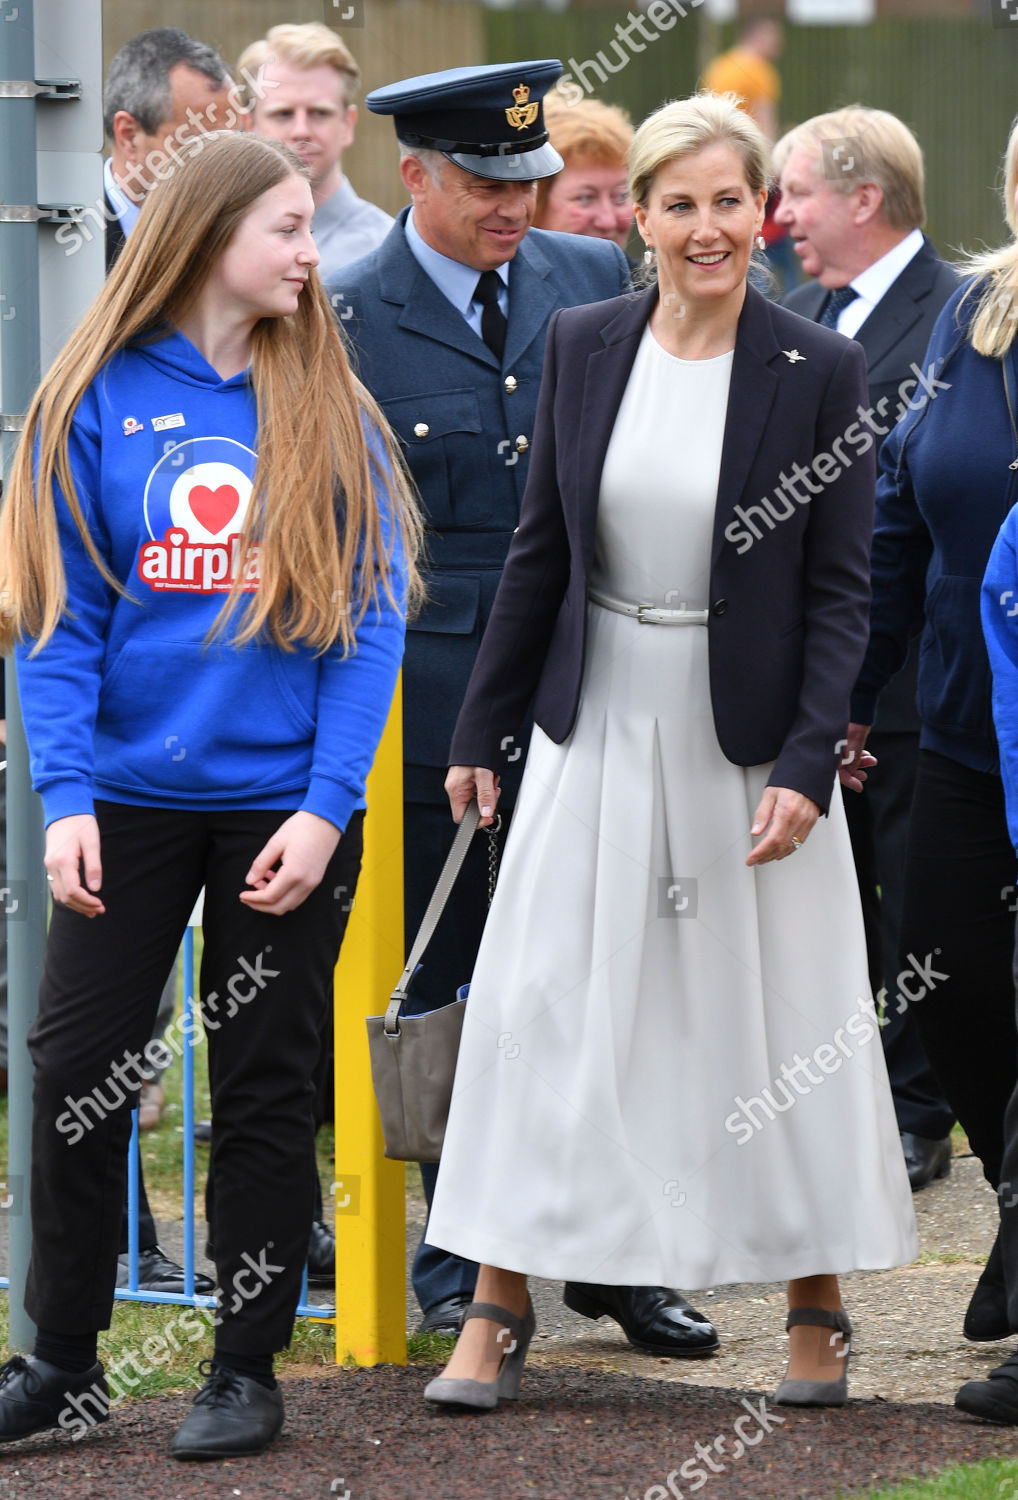 sophie-countess-of-wessex-opens-airplay-play-park-wittering-village-peterborough-uk-shutterstock-editorial-10217568k.jpg